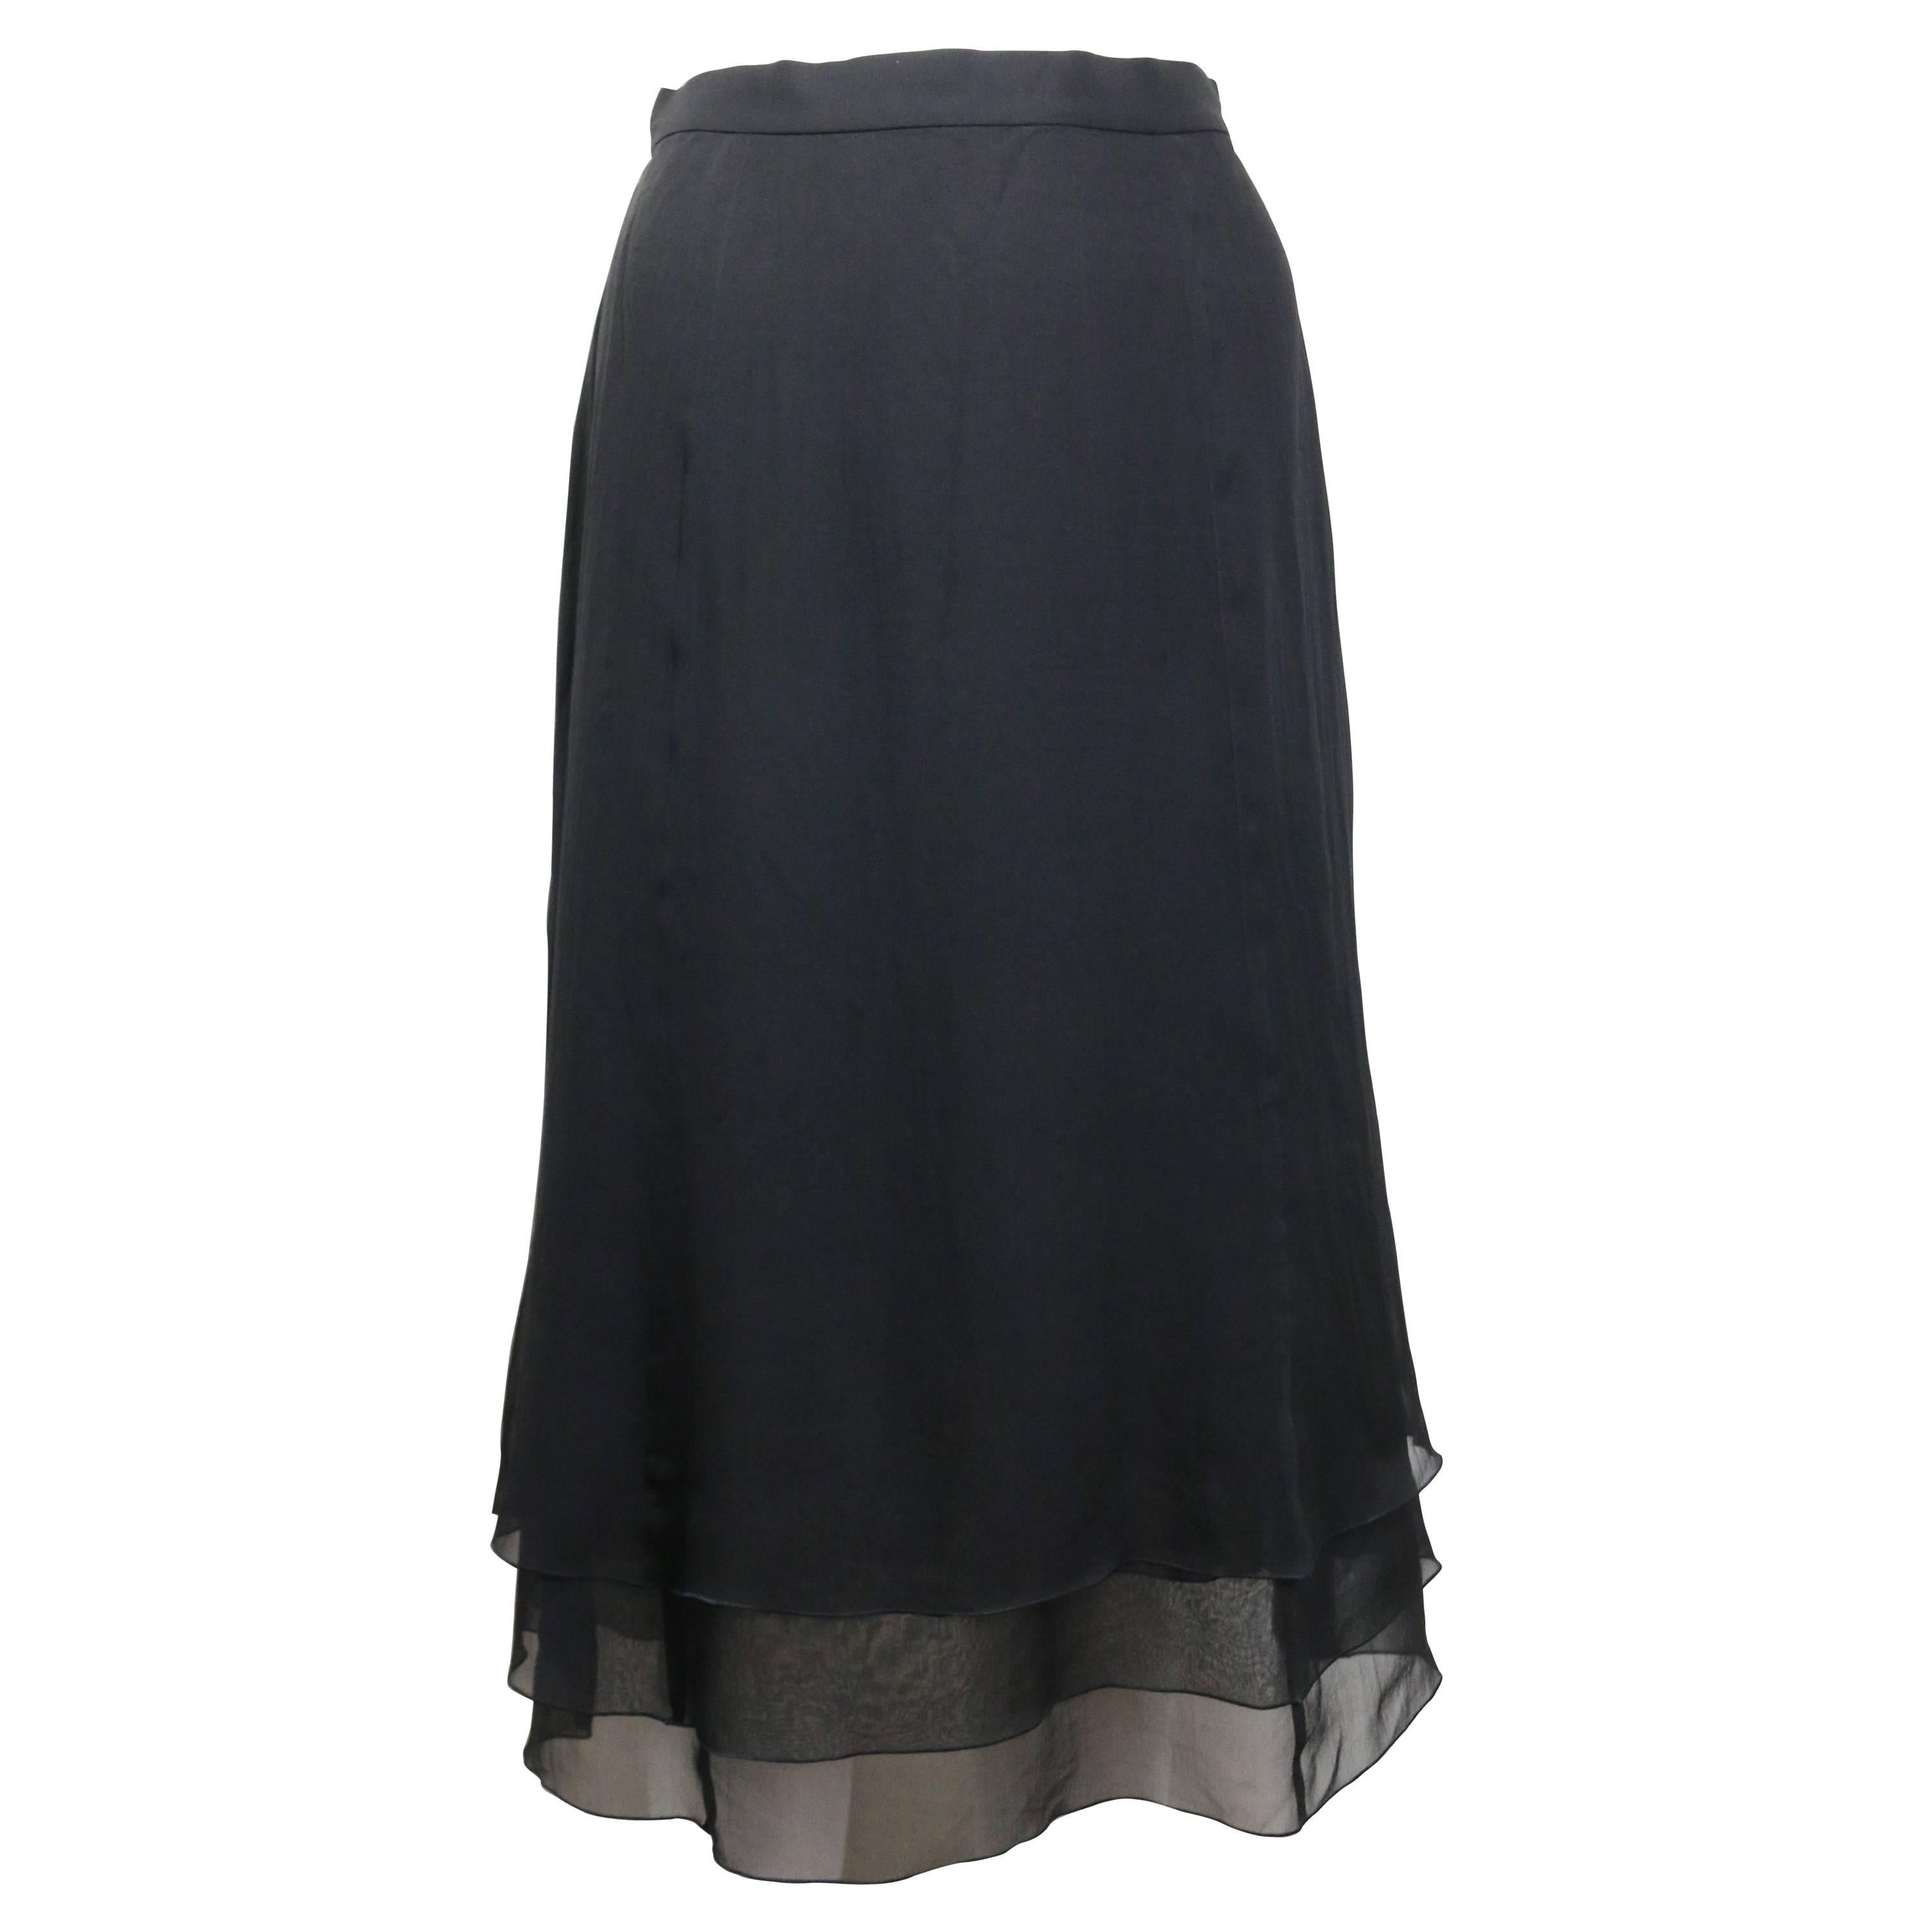 - Vintage Chanel black silk knee length skirt from year 1995A. Featuring three layers with ruffle hem. One gold 